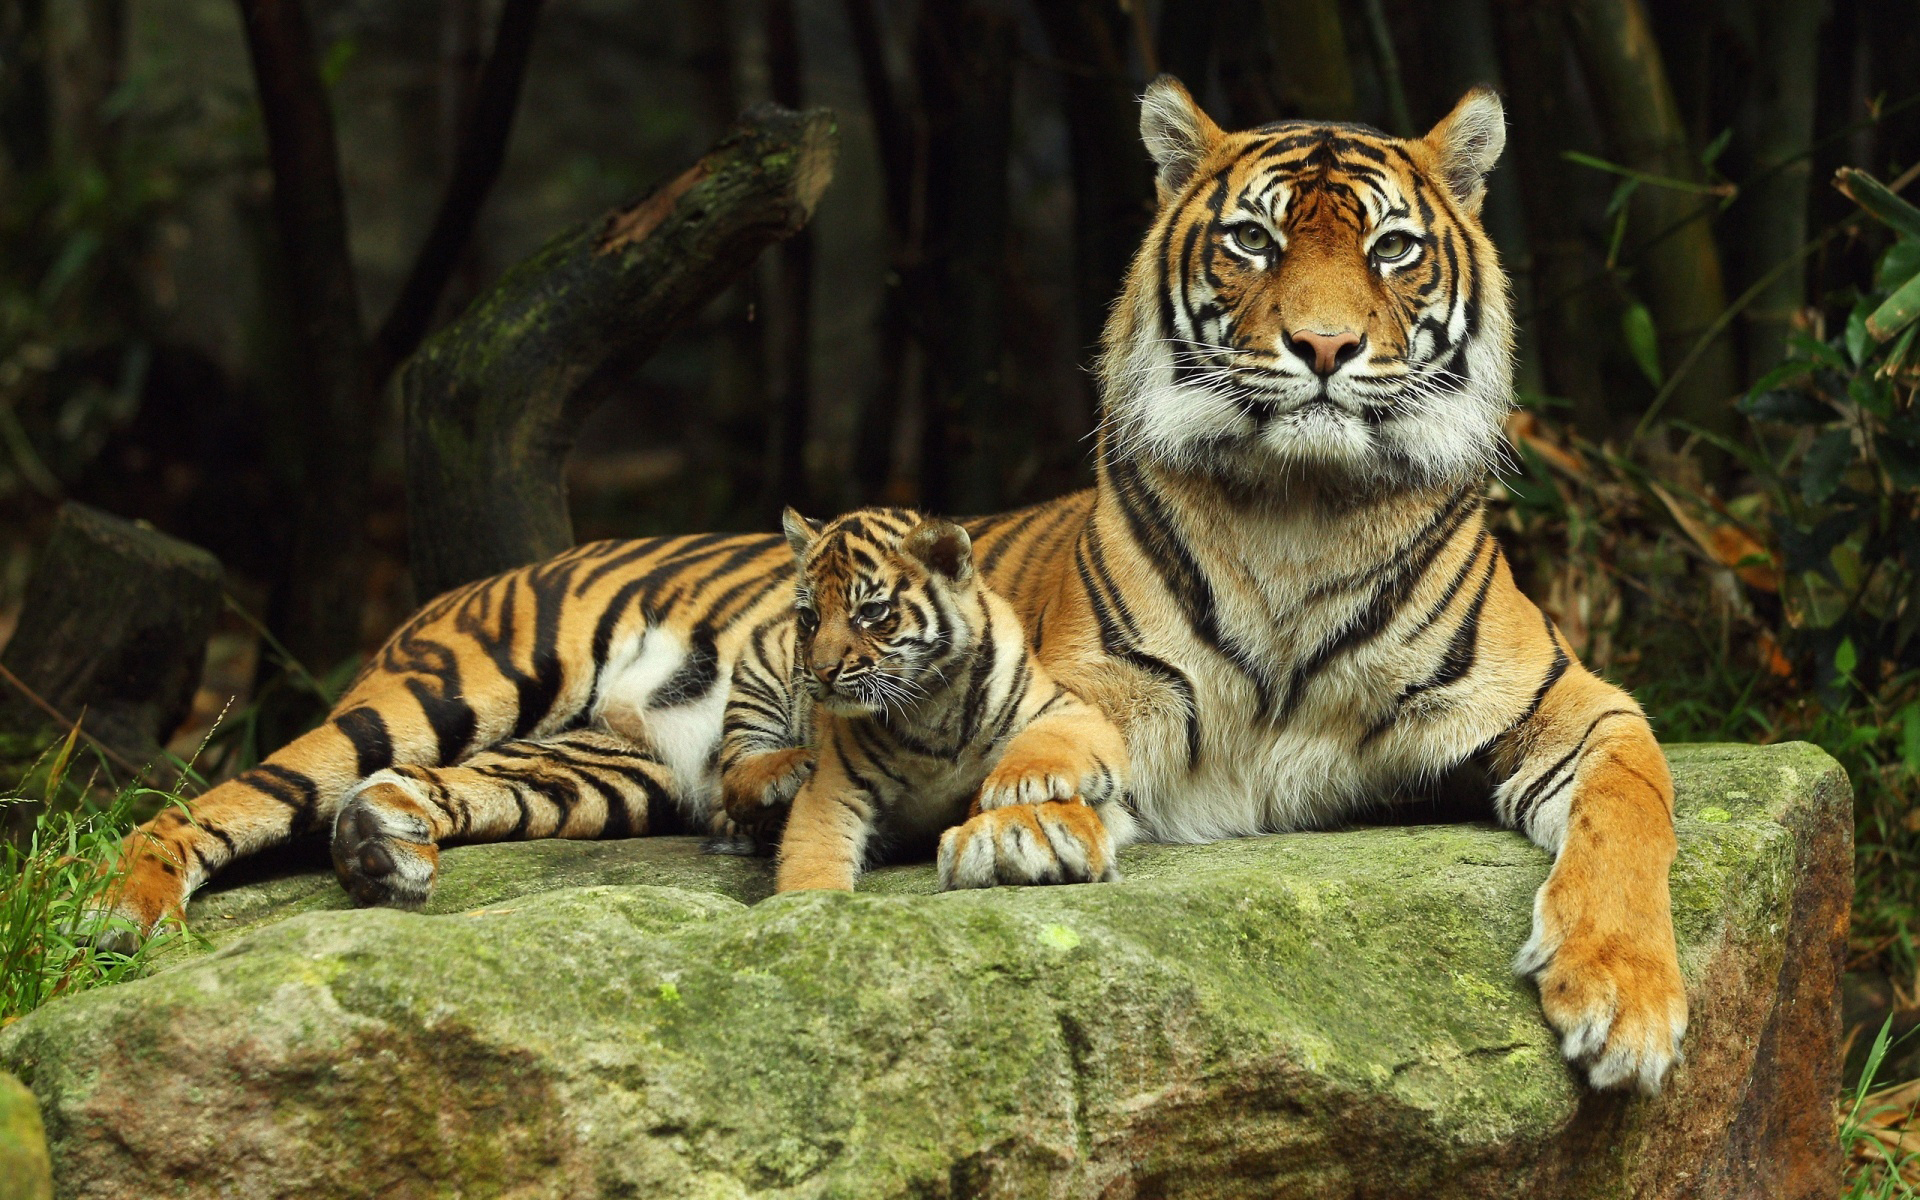 Tigress with tiger cub wallpapers and images   wallpapers pictures 1920x1200